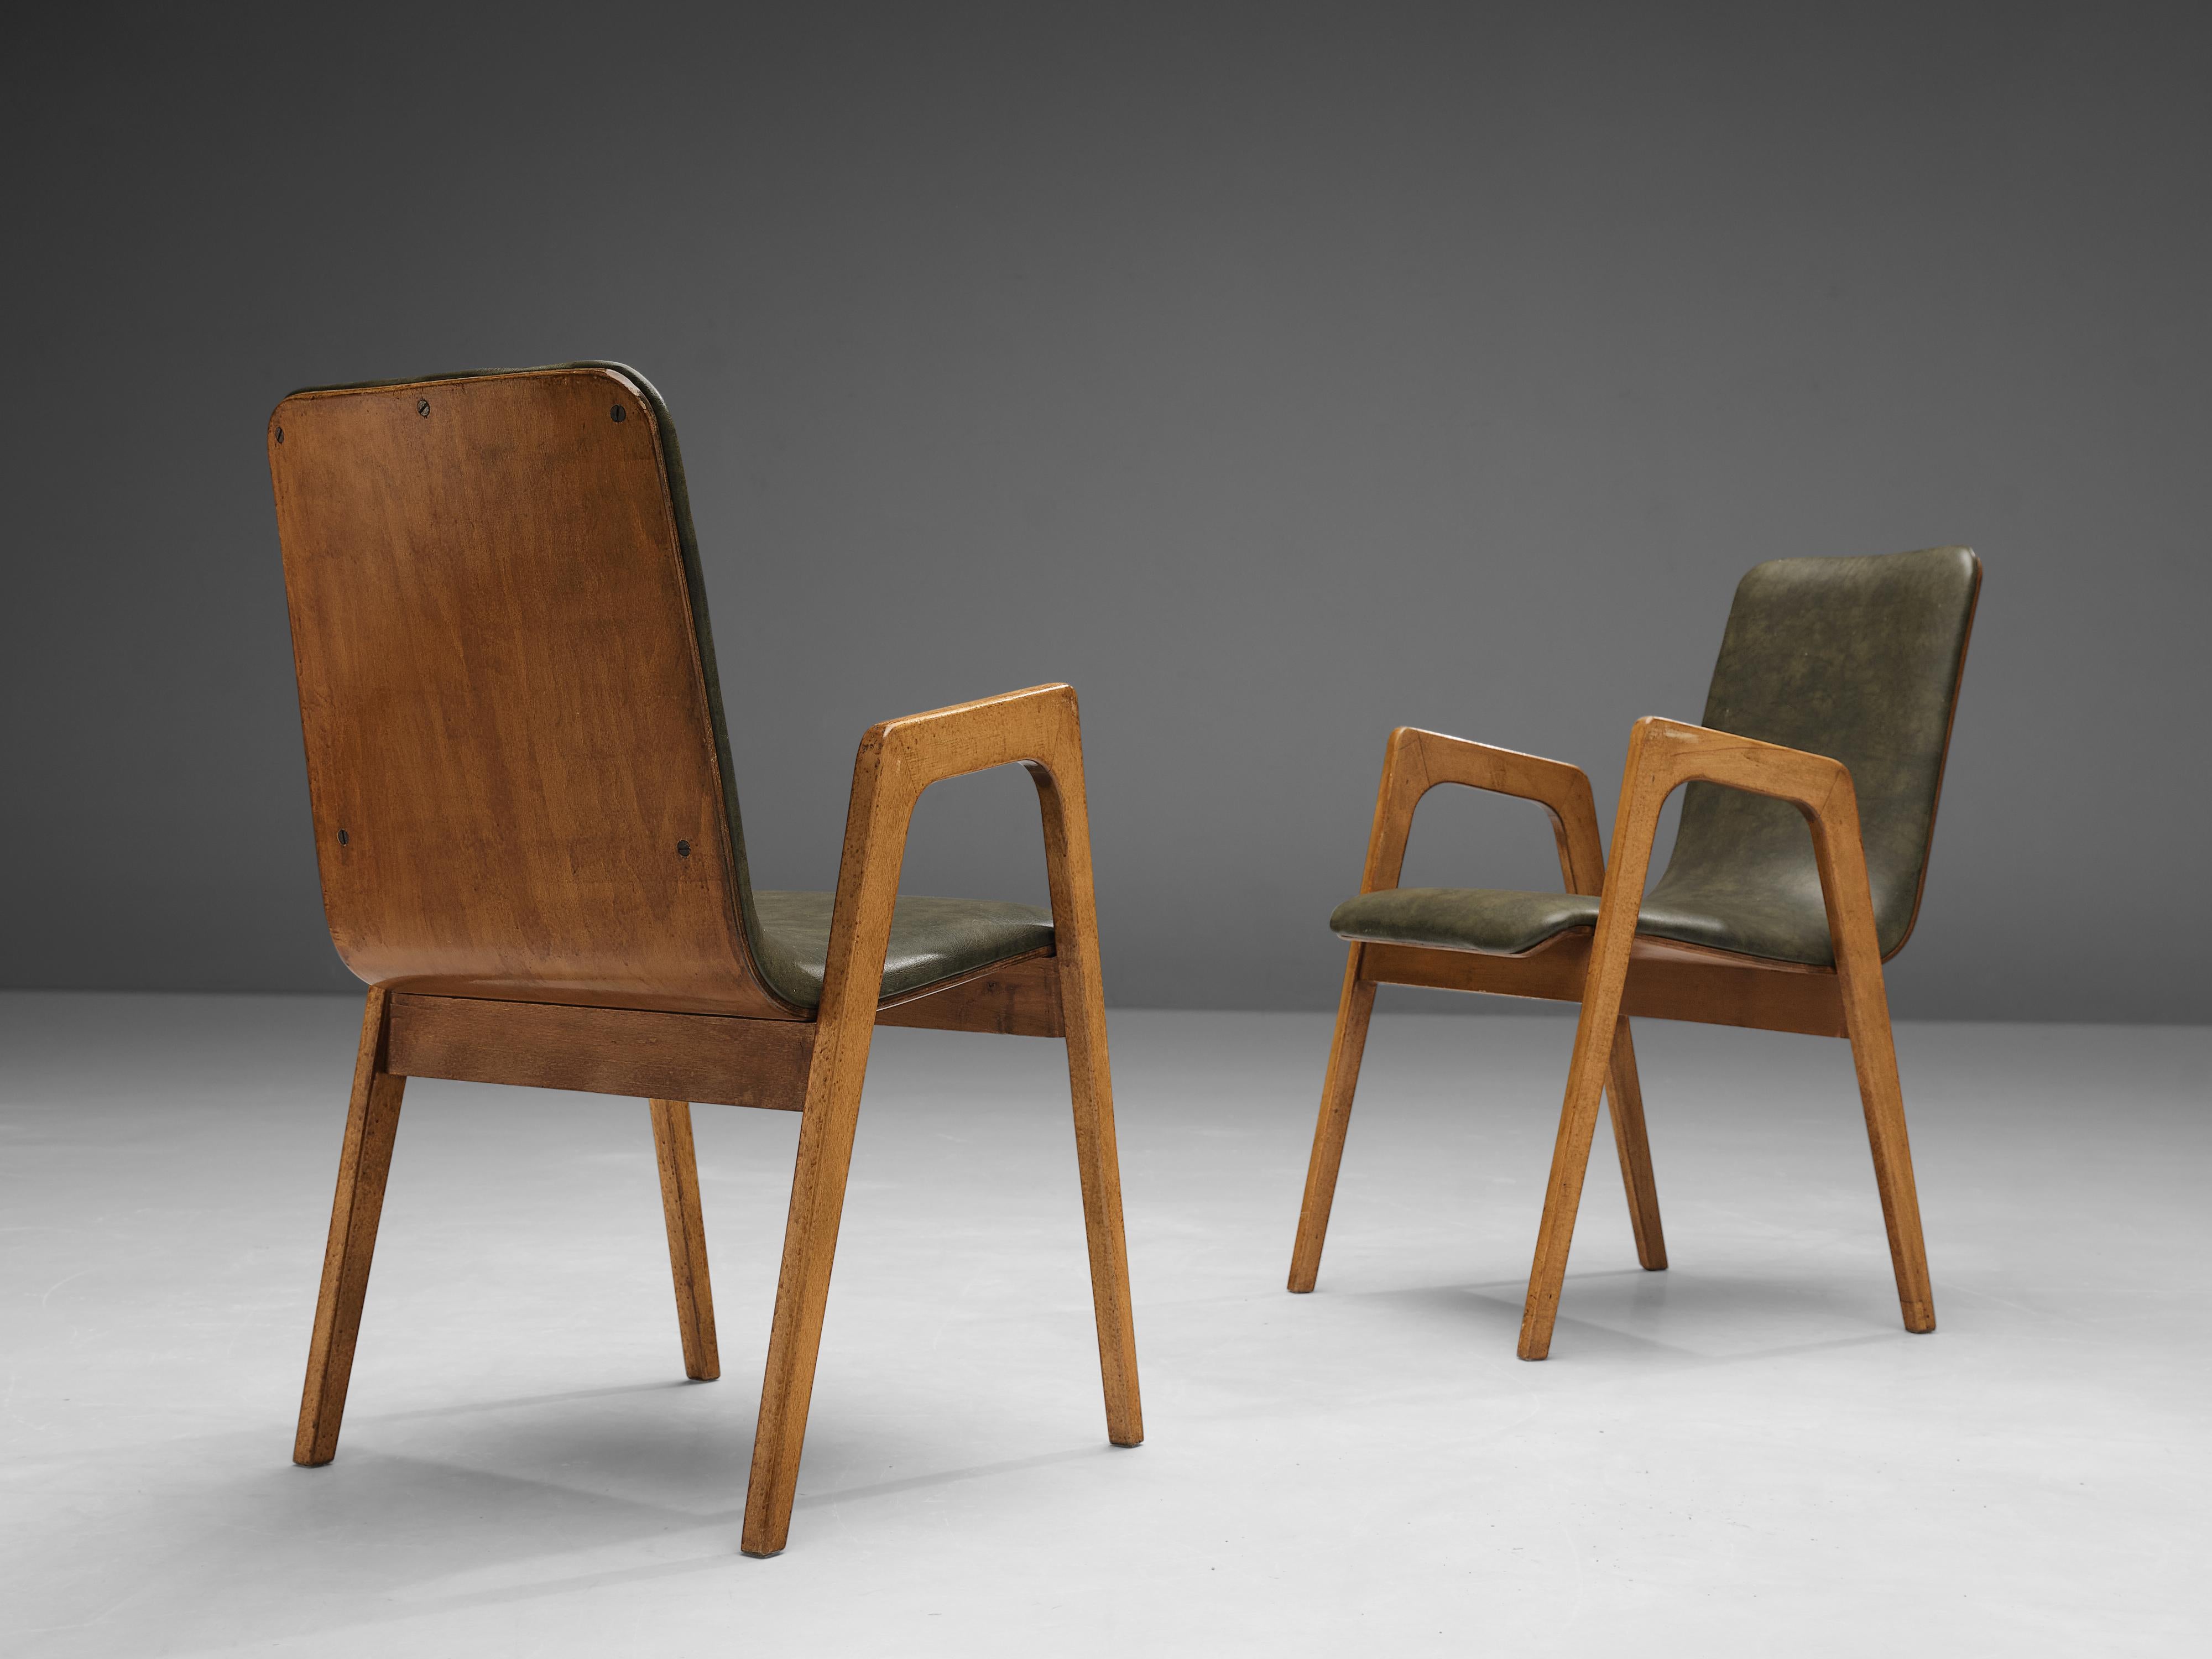 Roland Rainer, armchairs, birch, faux leather, Austria, 1960s.

These armchairs, designed by Roland Rainer, were executed to perfection and provide great comfort. These chairs look almost sculpted thanks to the exquisite woodwork of the walnut